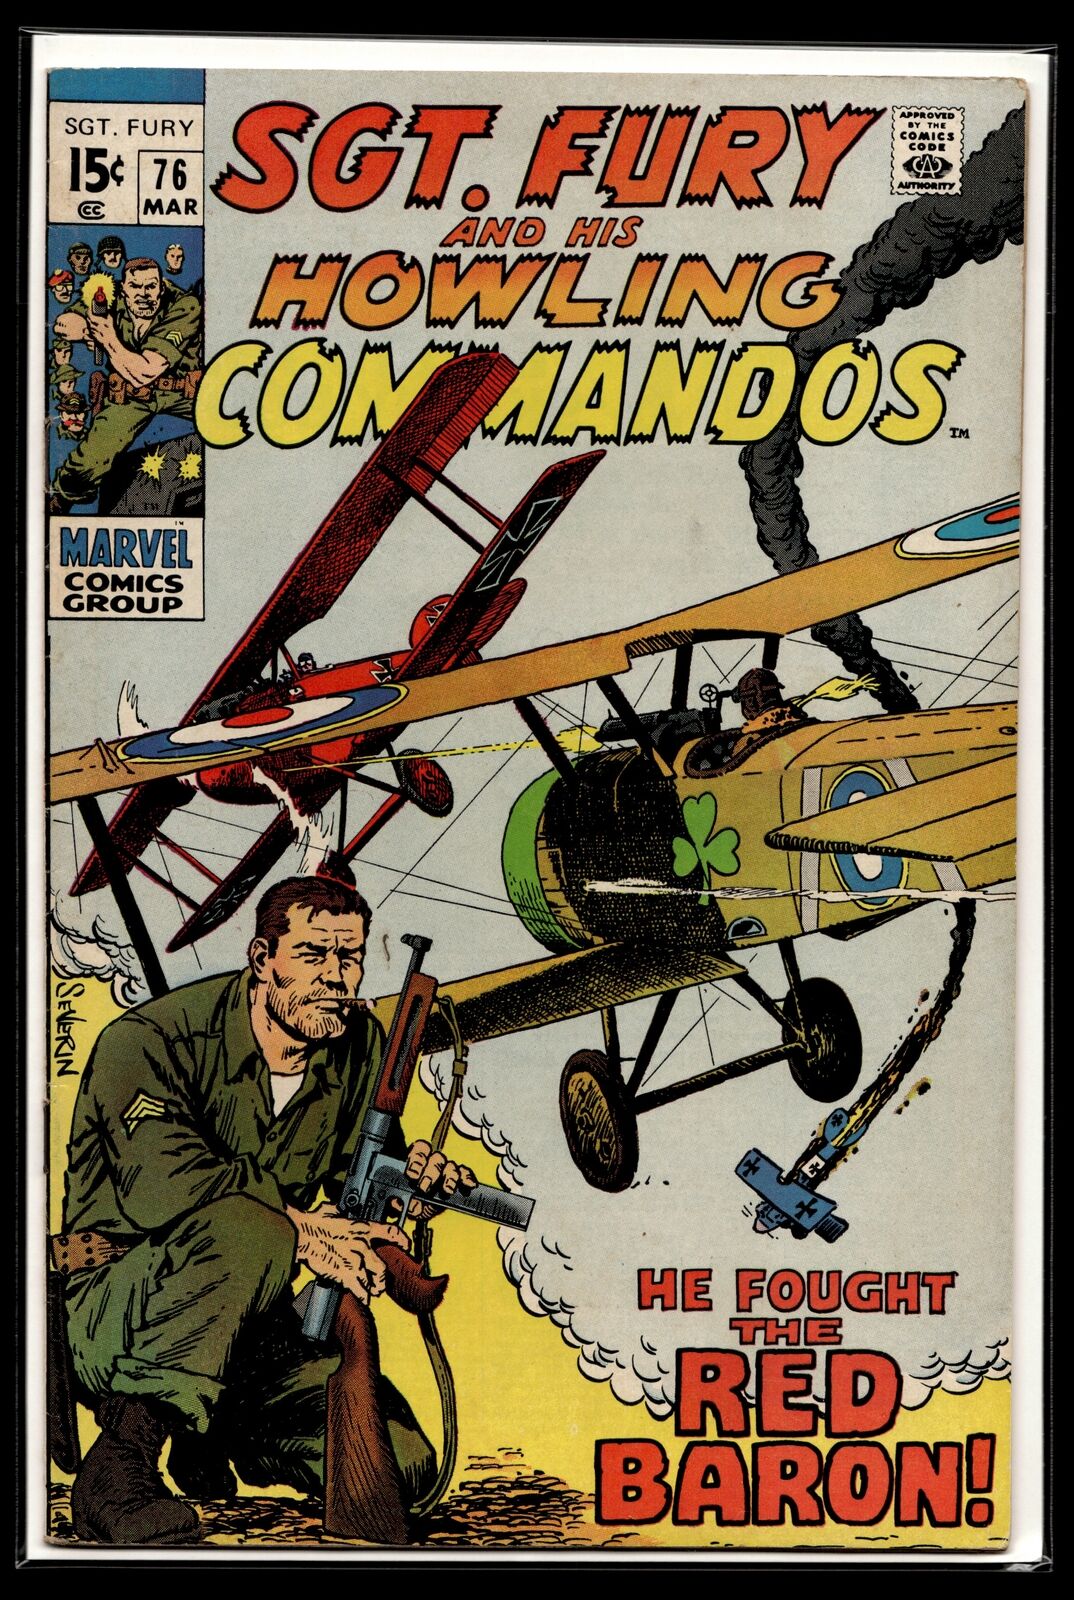 1970 Sgt. Fury and His Howling Commandos #76 Marvel Comic